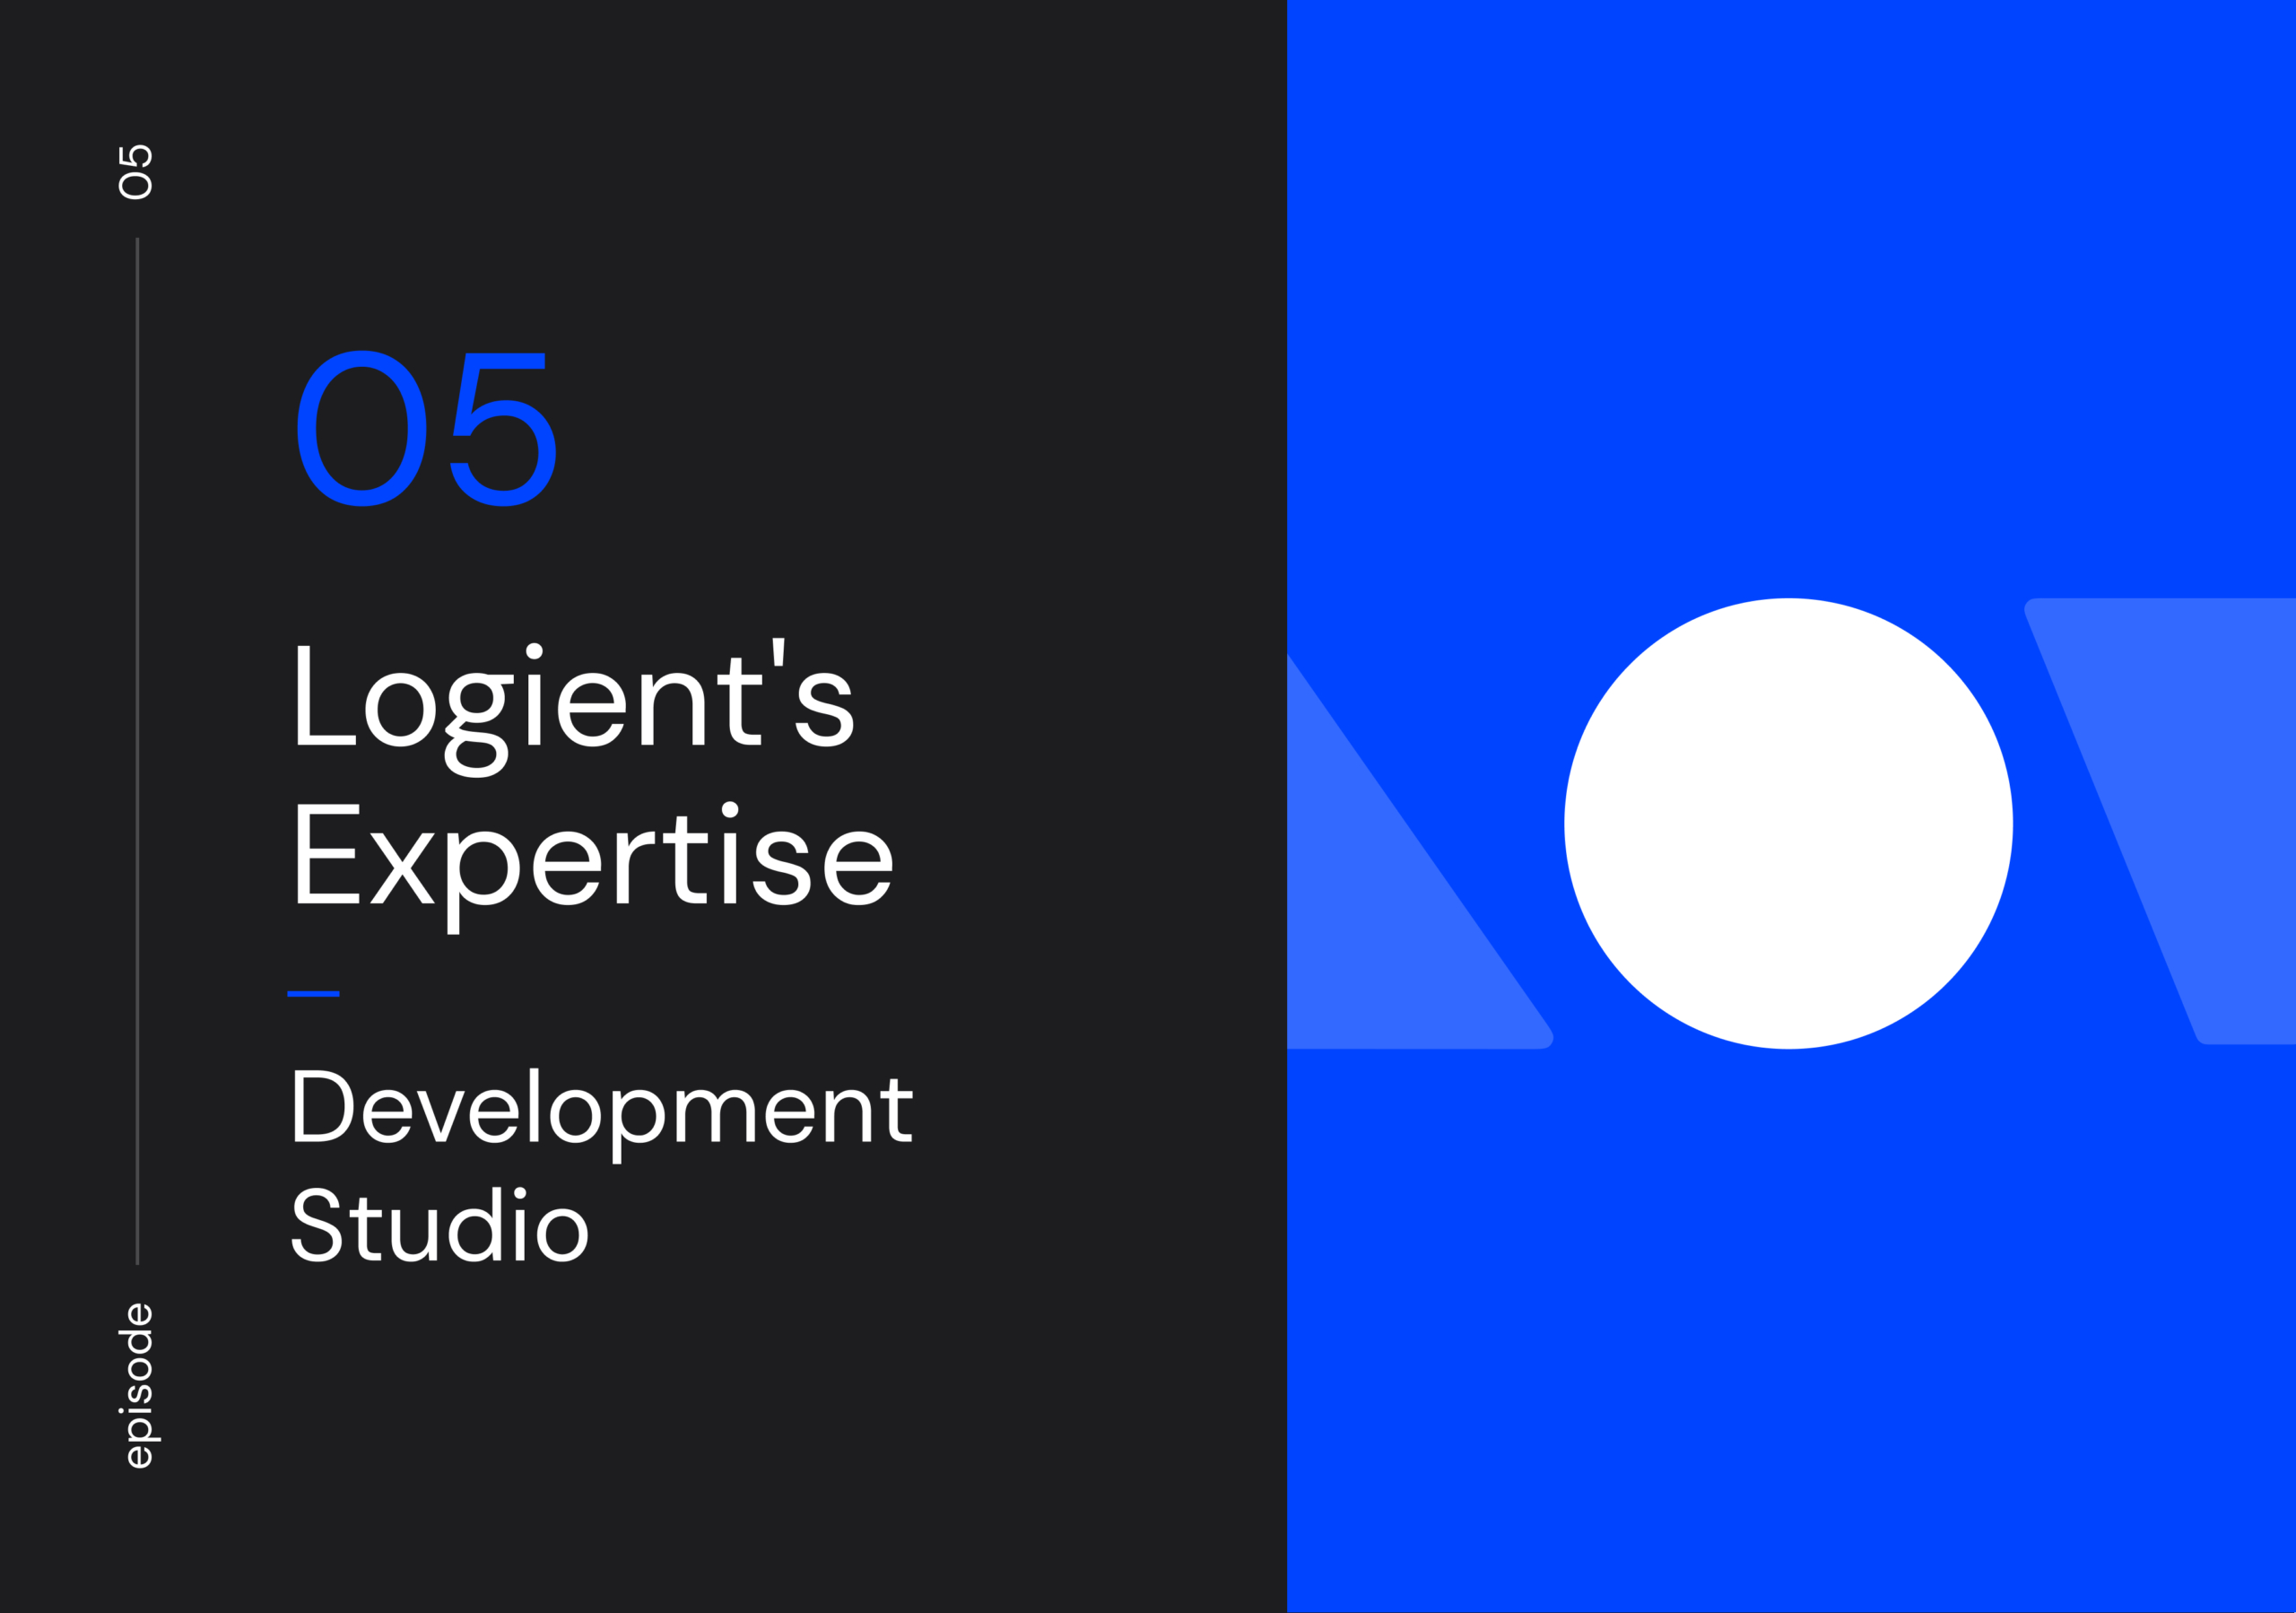 Development Studio: For robust, adaptive and quality code